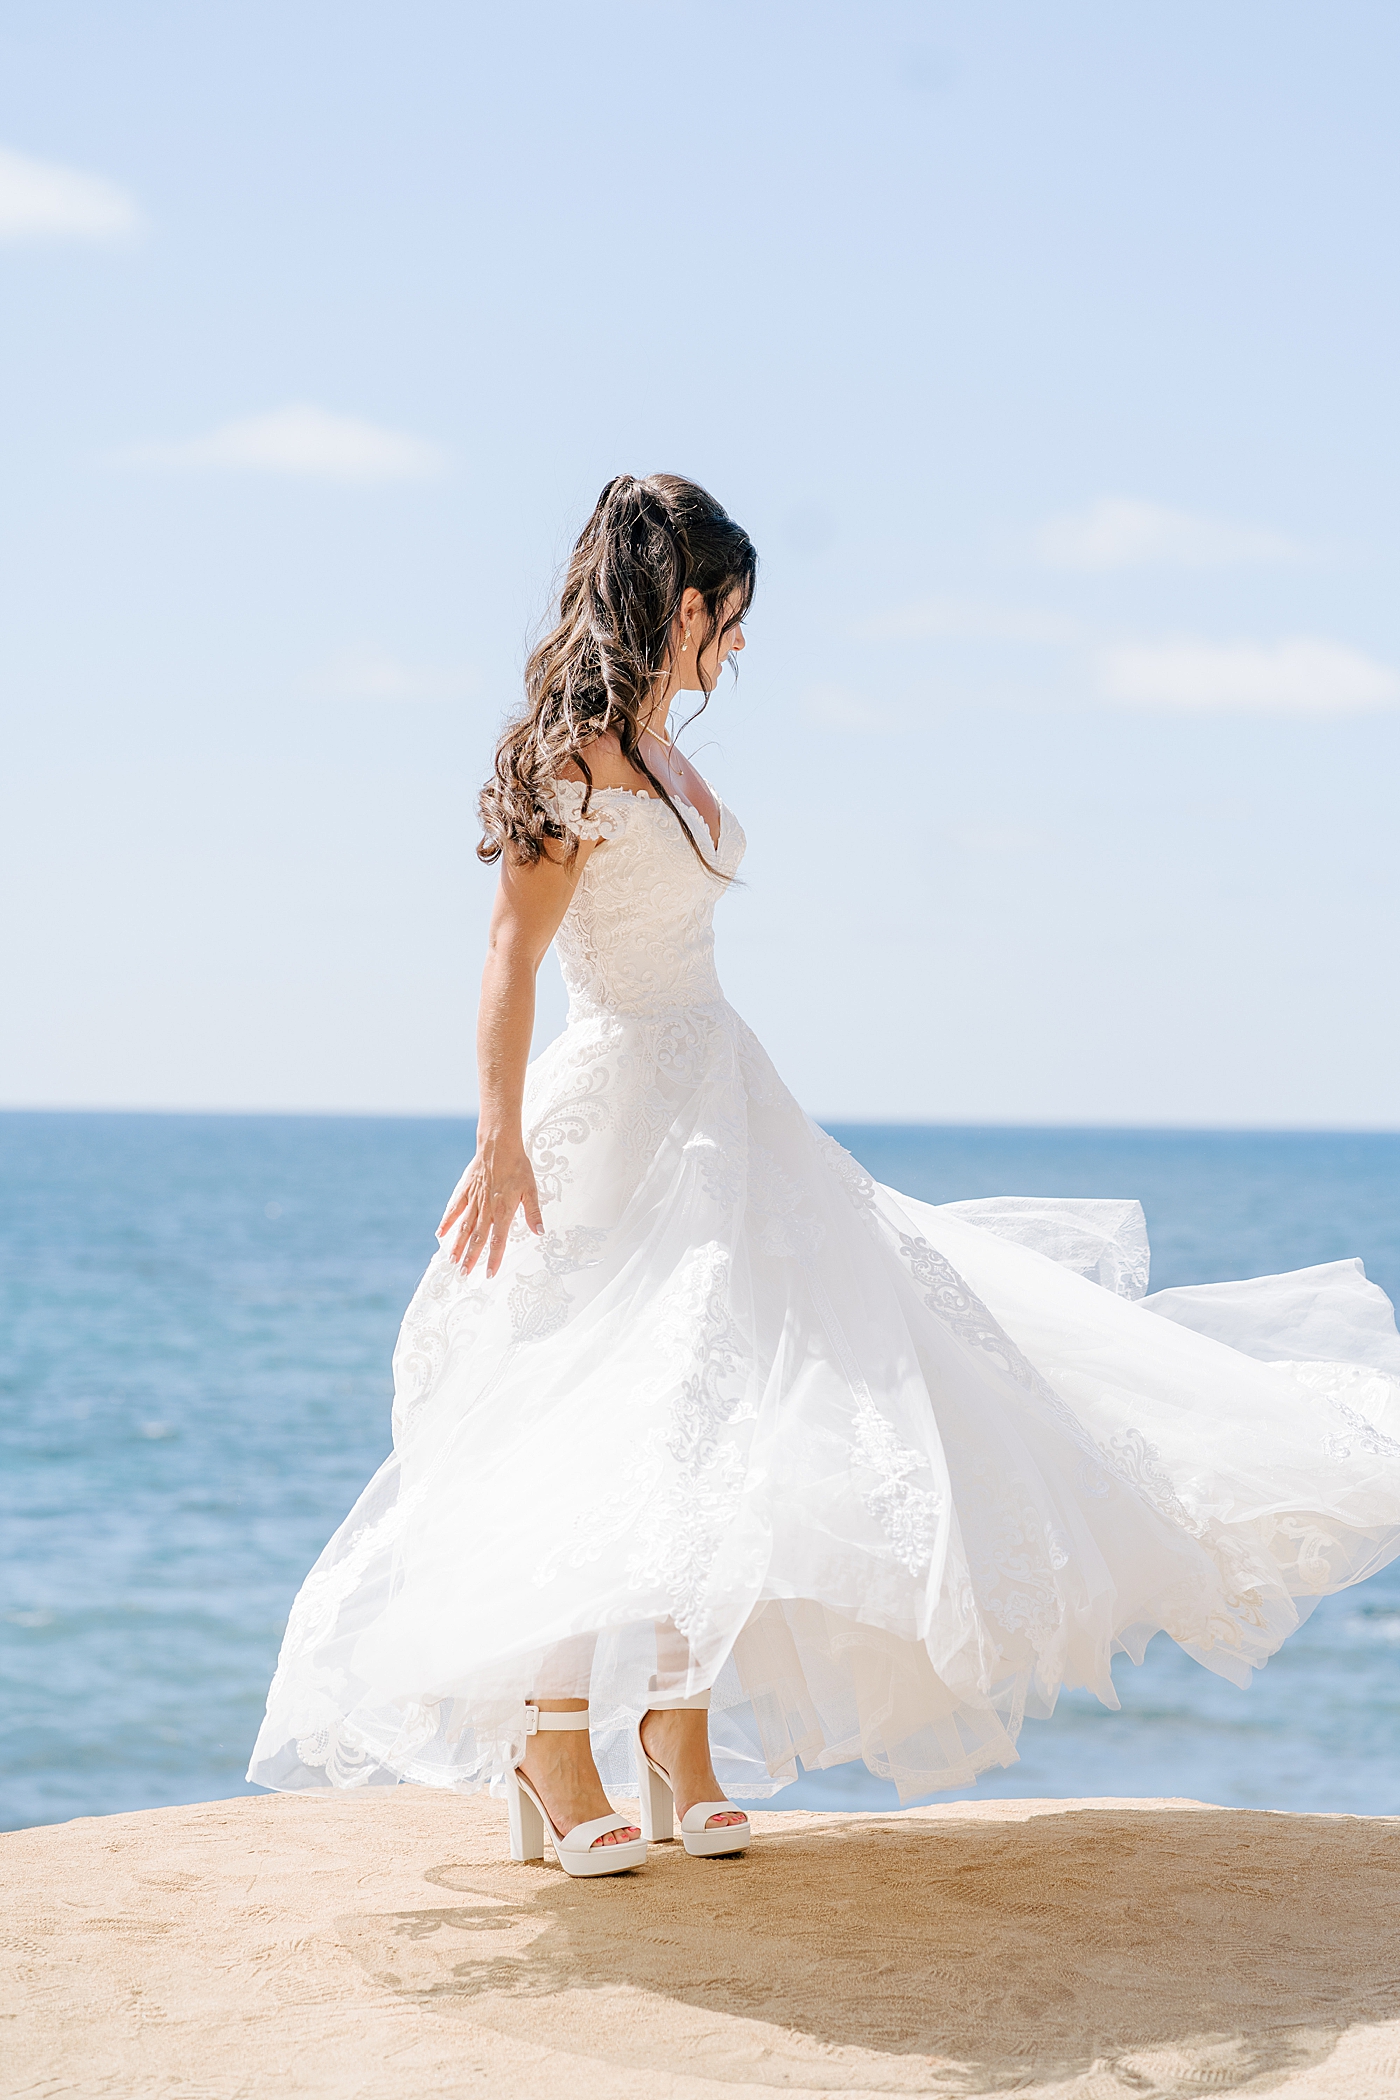 Bright photo of a bride oceanfront looking away from the camera while spinning in her dress | Image by Hope Helmuth Photography